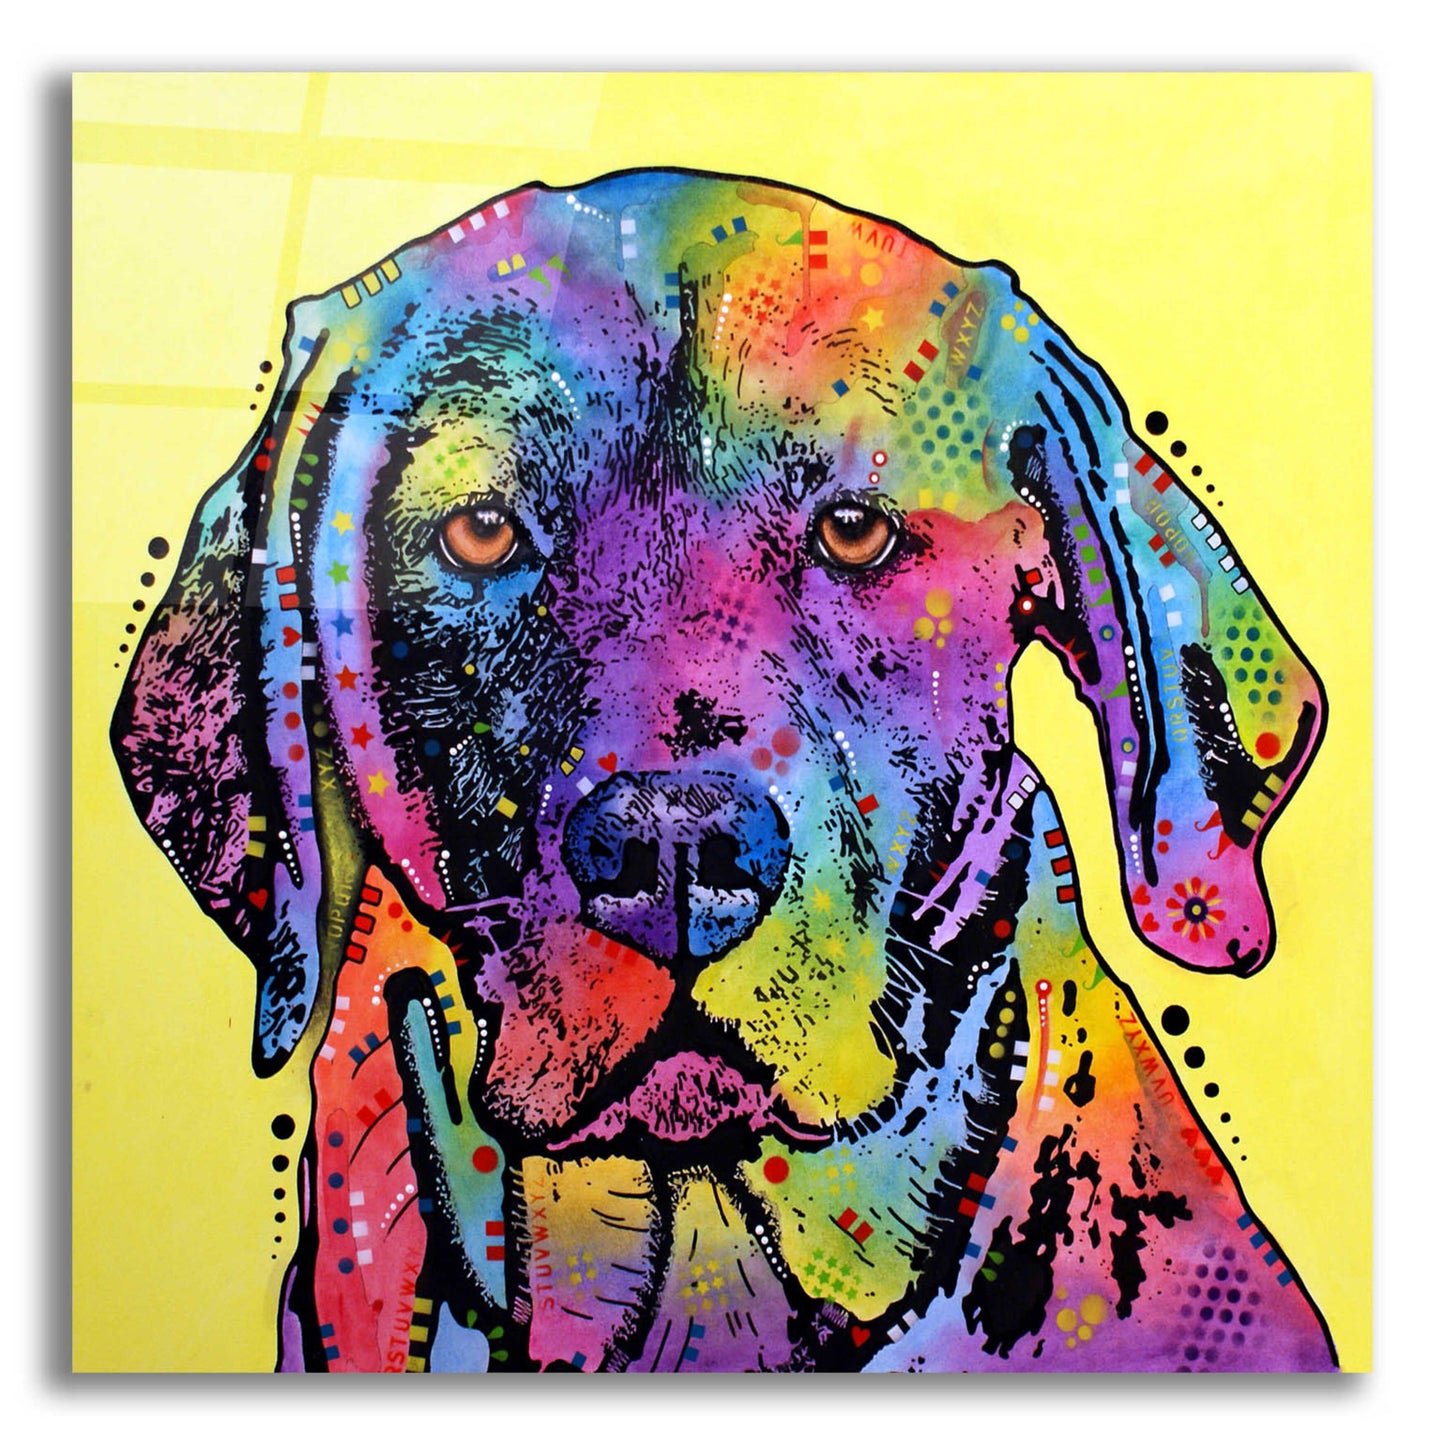 Epic Art 'Fixate Labrador' by Dean Russo, Acrylic Glass Wall Art,12x12